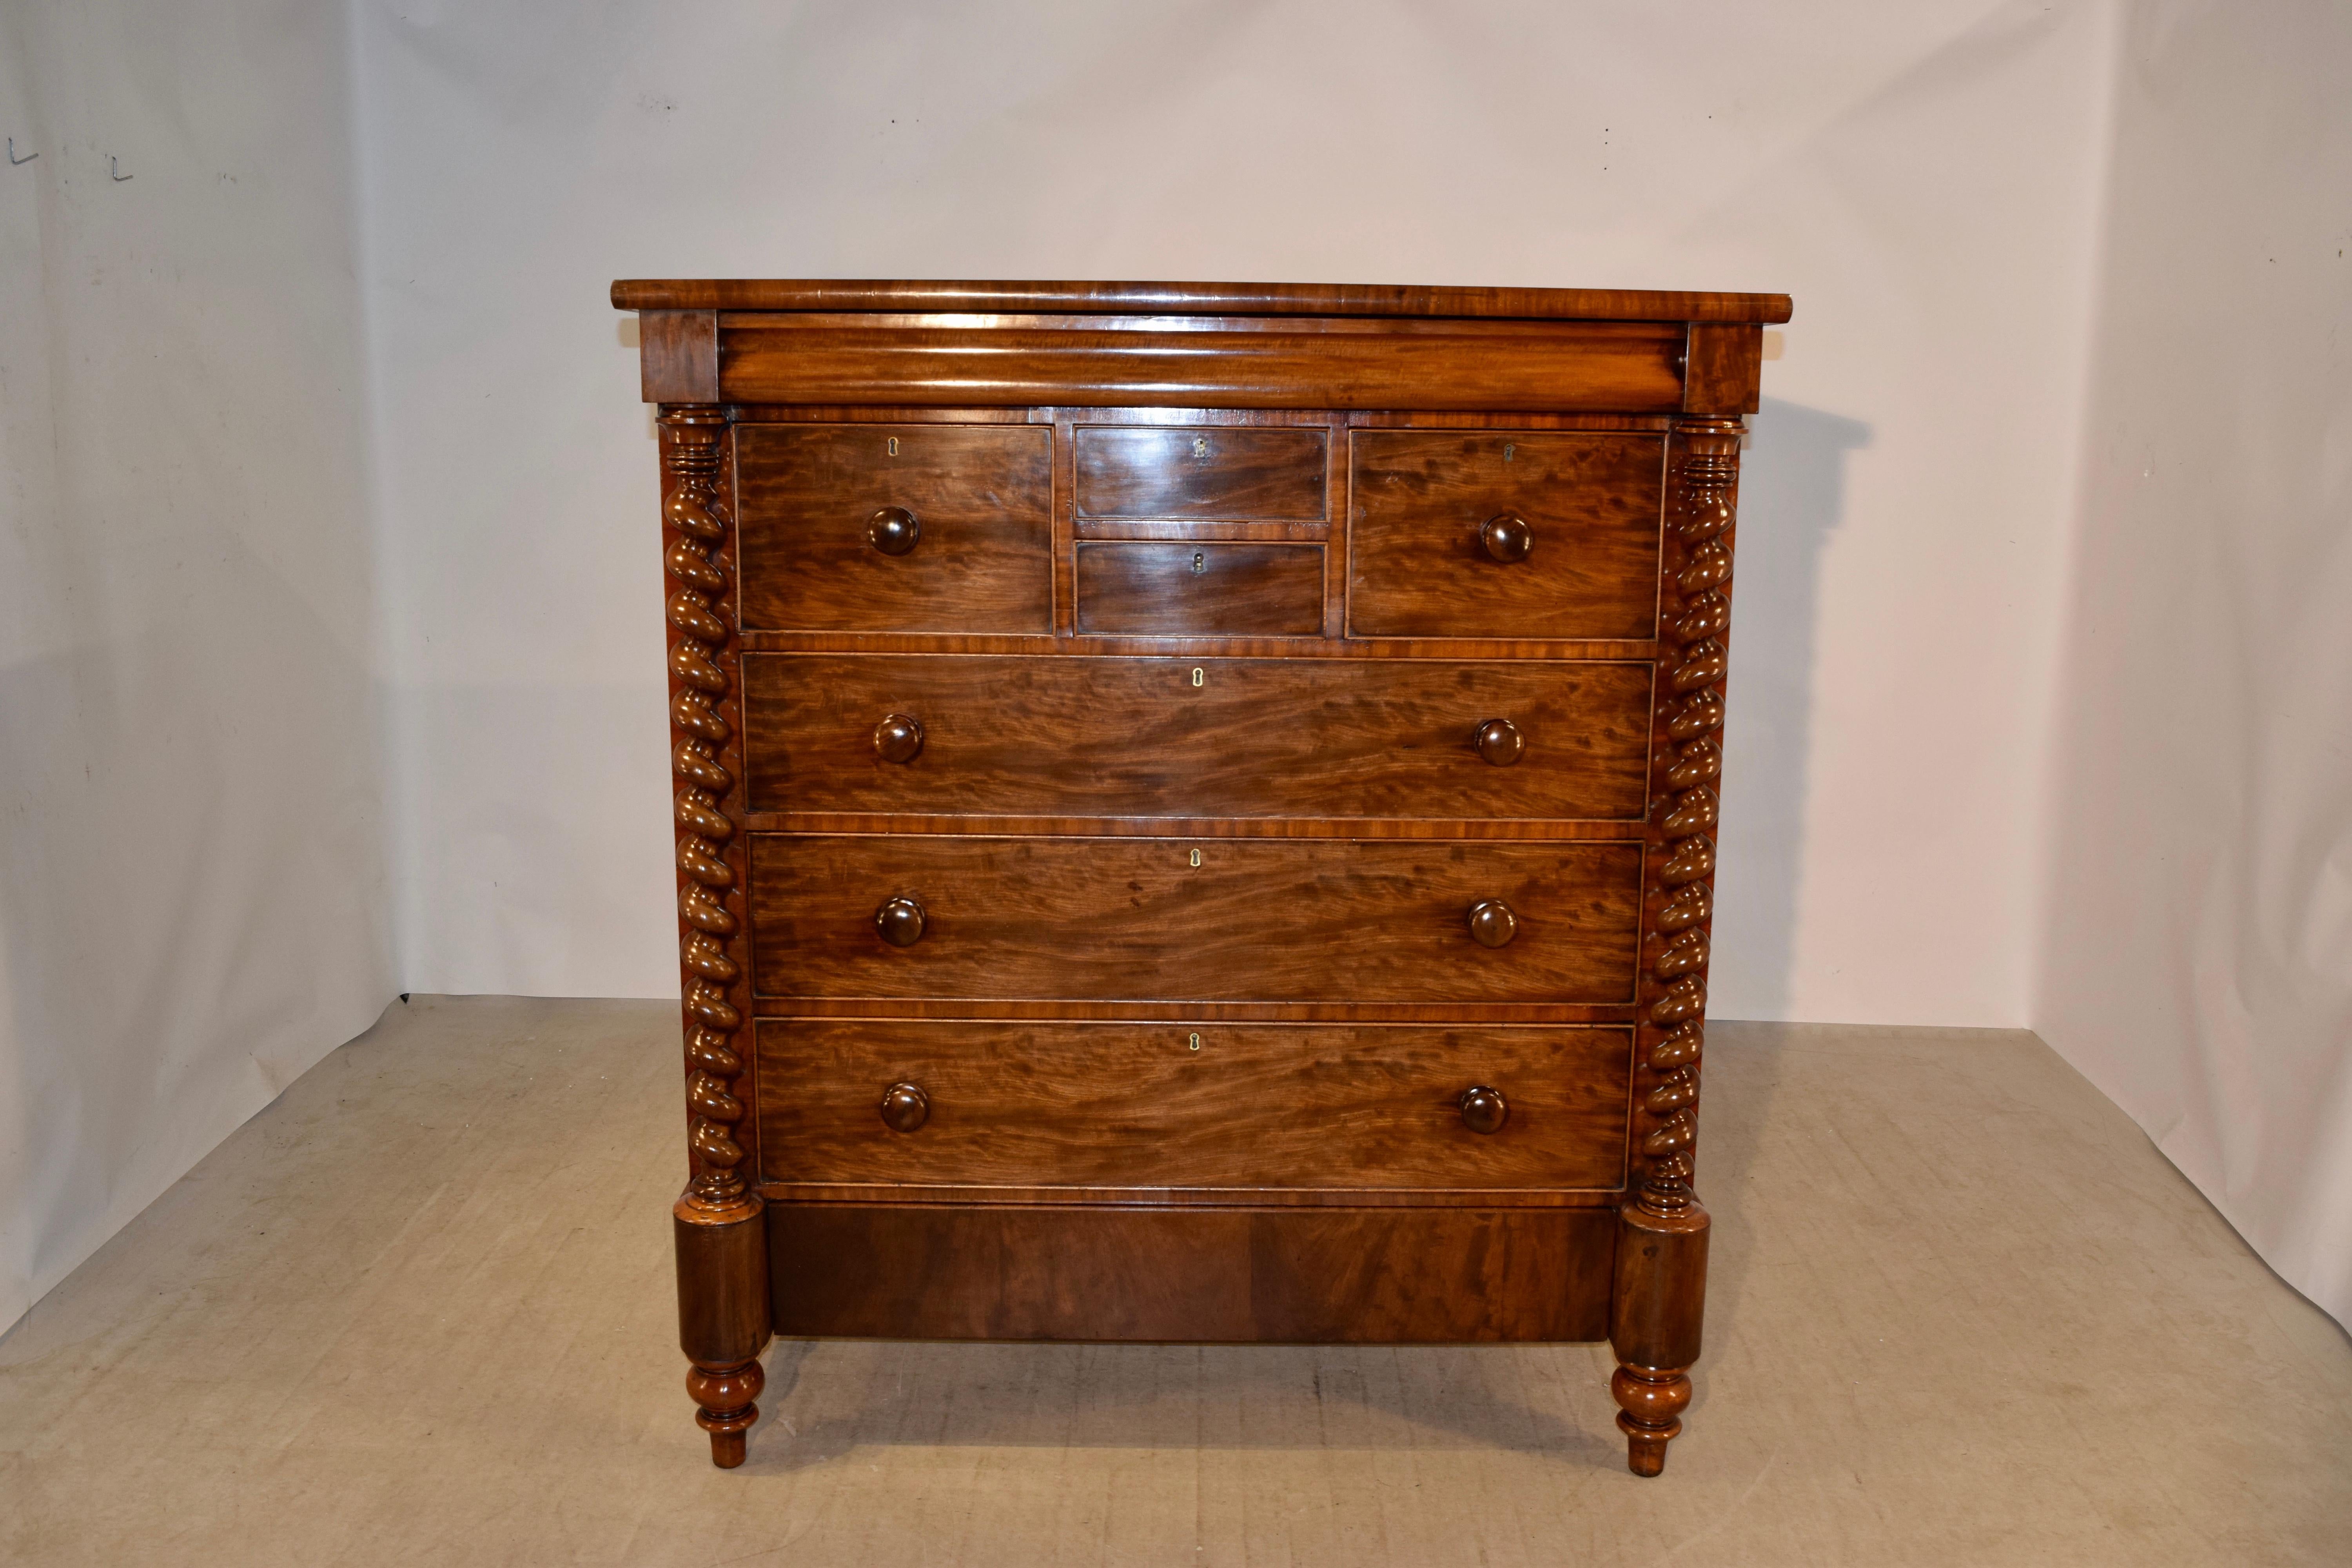 19th century large chest of drawers from Scotland made from mahogany. The top has a domed edge following down to a lovely serpentine shaped molding, which is a hidden drawer. At the top of the chest, there are two central small drawers, flanked by